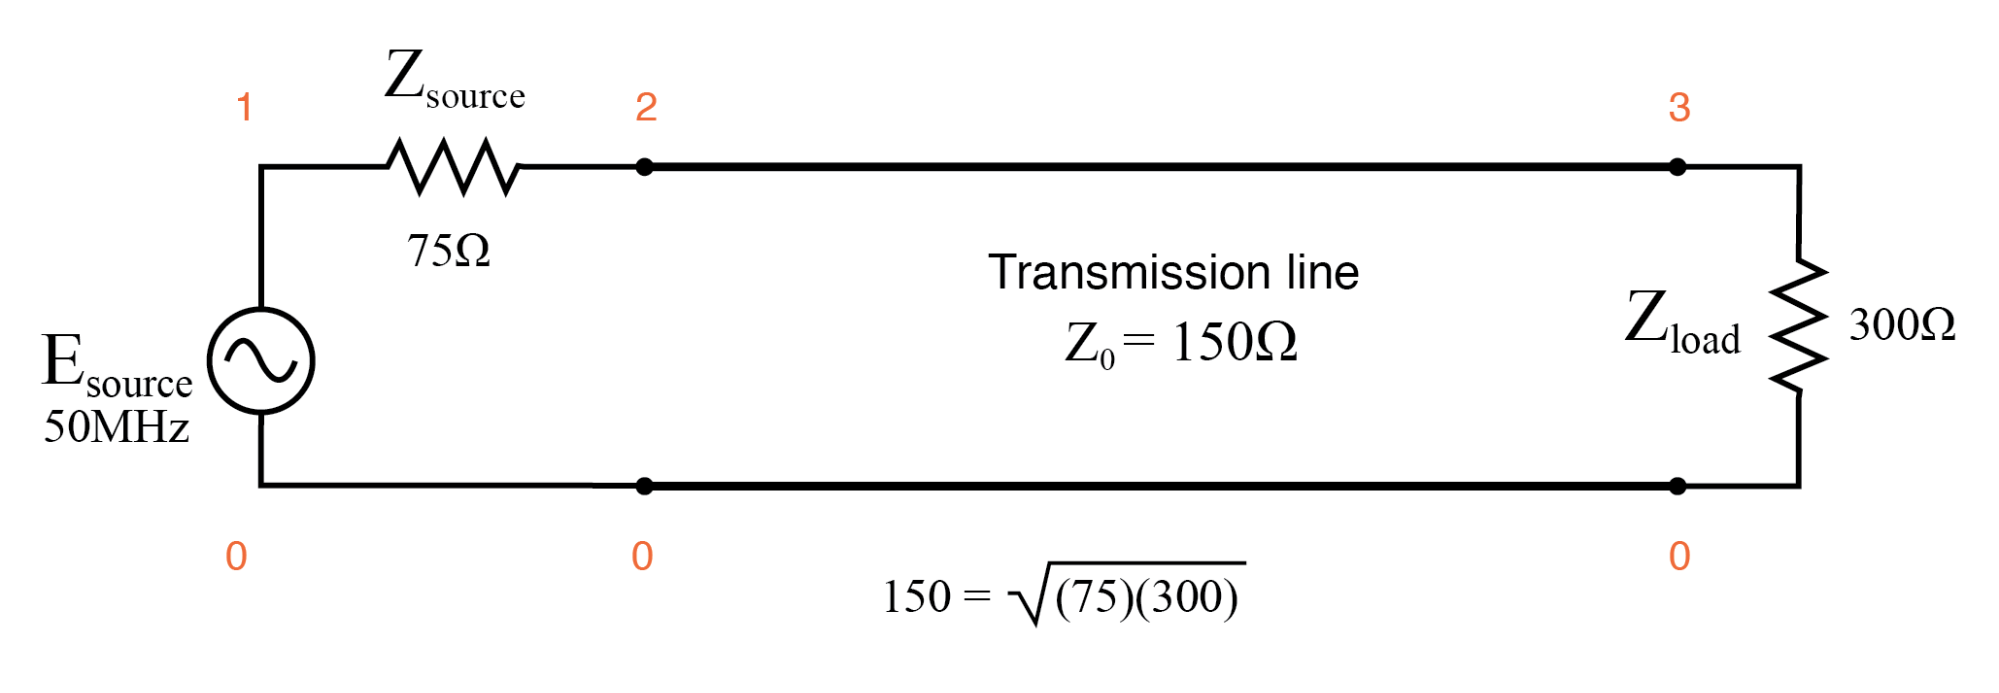 Quarter wave section of 150 Ω transmission line matches 75 Ω source to 300 Ω load.